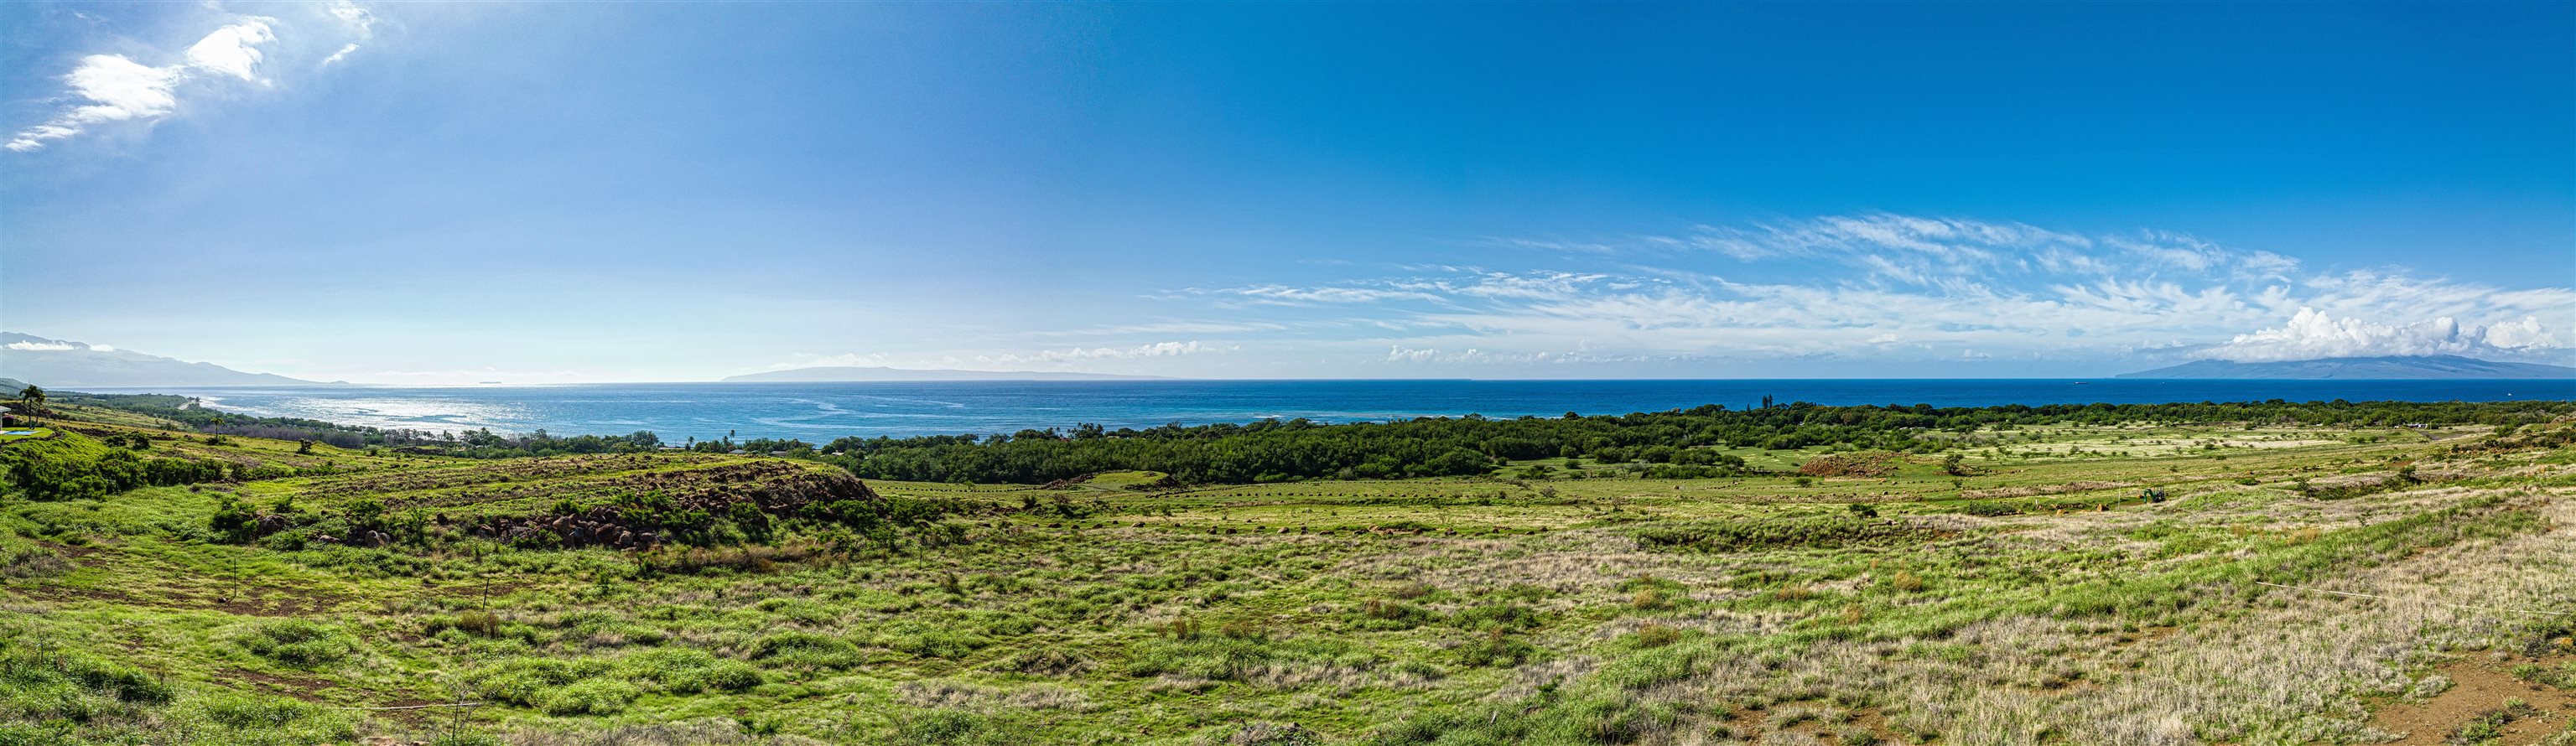 479 Luawai St A Lahaina, Hi vacant land for sale - photo 13 of 30